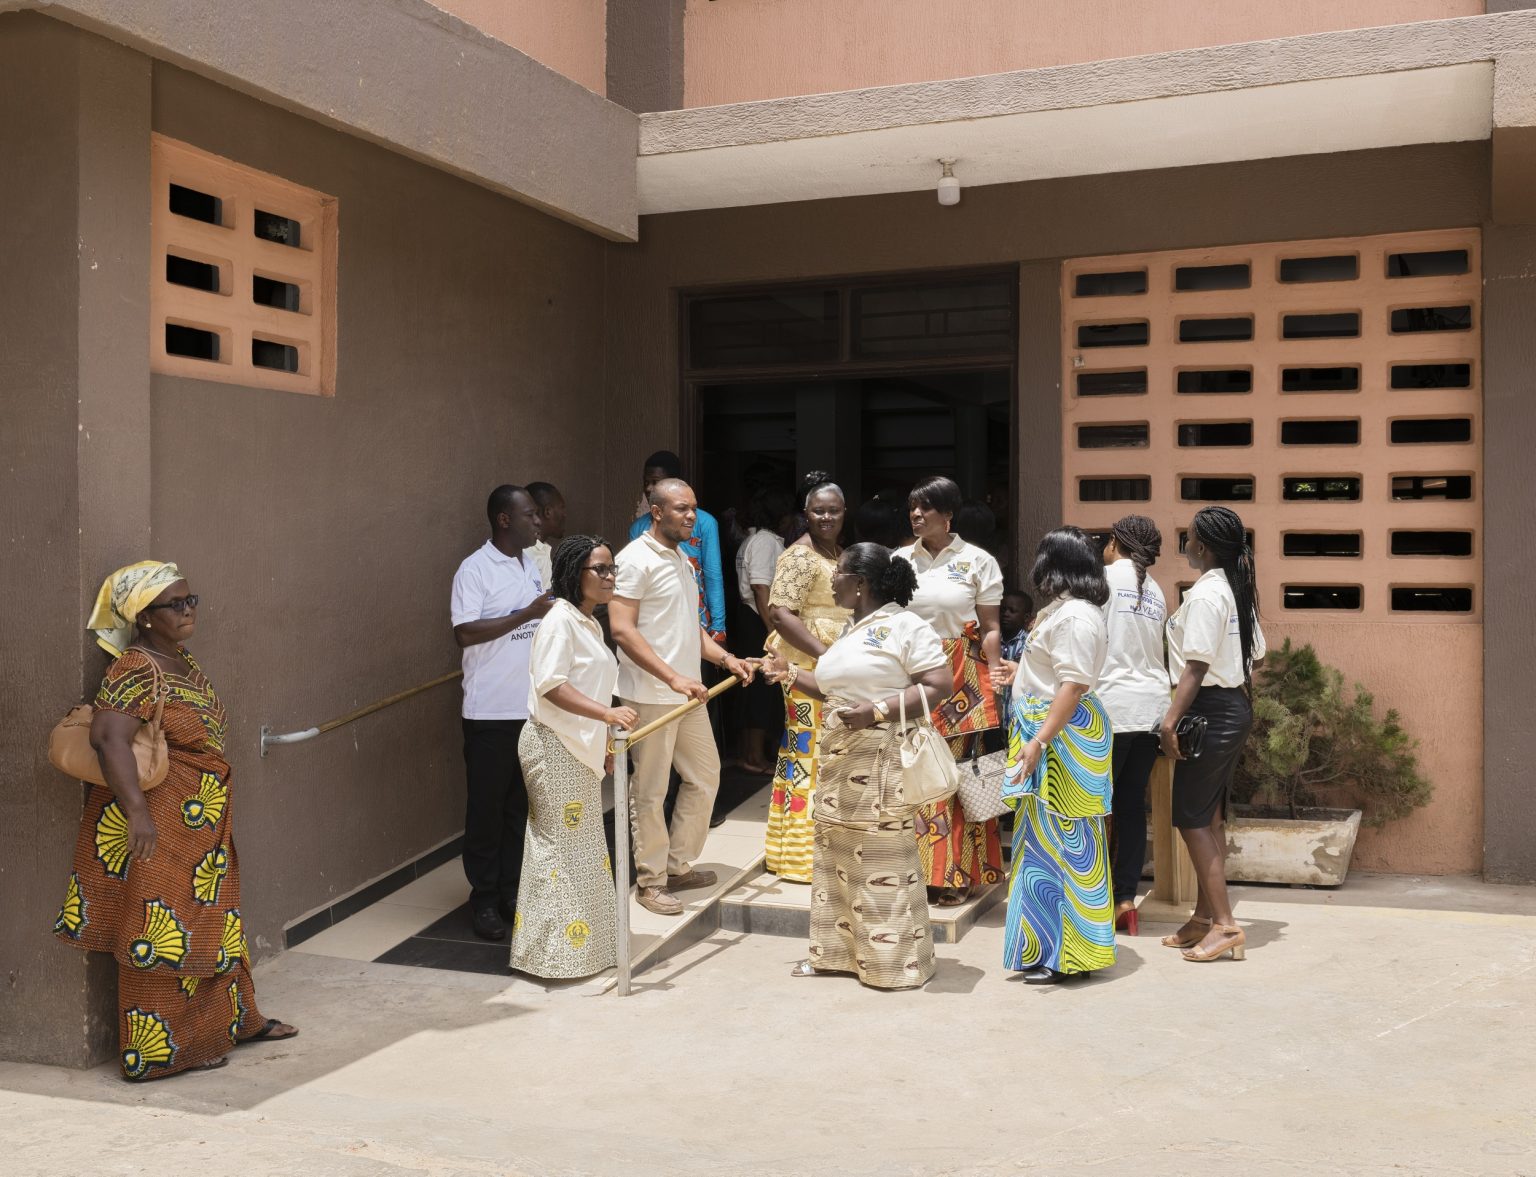 Accra, Republic of Ghana, March 2019 - Faithfuls at the entrance of the Assemblies of God's branch in North Kaneshie after the Sunday morning service. The Assemblies of God (AG), officially the World Assemblies of God Fellowship and founded in 1914 in Hot Springs, Arkansas, is a group of over 140 autonomous but loosely associated national groupings of churches which together form the world's largest Pentecostal denomination. >< Accra, Repubblica del Ghana, marzo 2019 - Fedeli all'uscita della sede di North Kaneshie della Assemblies of God dopo la messa della domenica mattina. The Assemblies of God (AG), ufficialmente World Assemblies of God Fellowship e fondato nel 1914 in Hot Springs, Arkansas, è un gruppo di oltre 140 gruppi autonomi ma liberamente associati di chiese che formano insieme la più grande denominazione pentecostale del mondo.